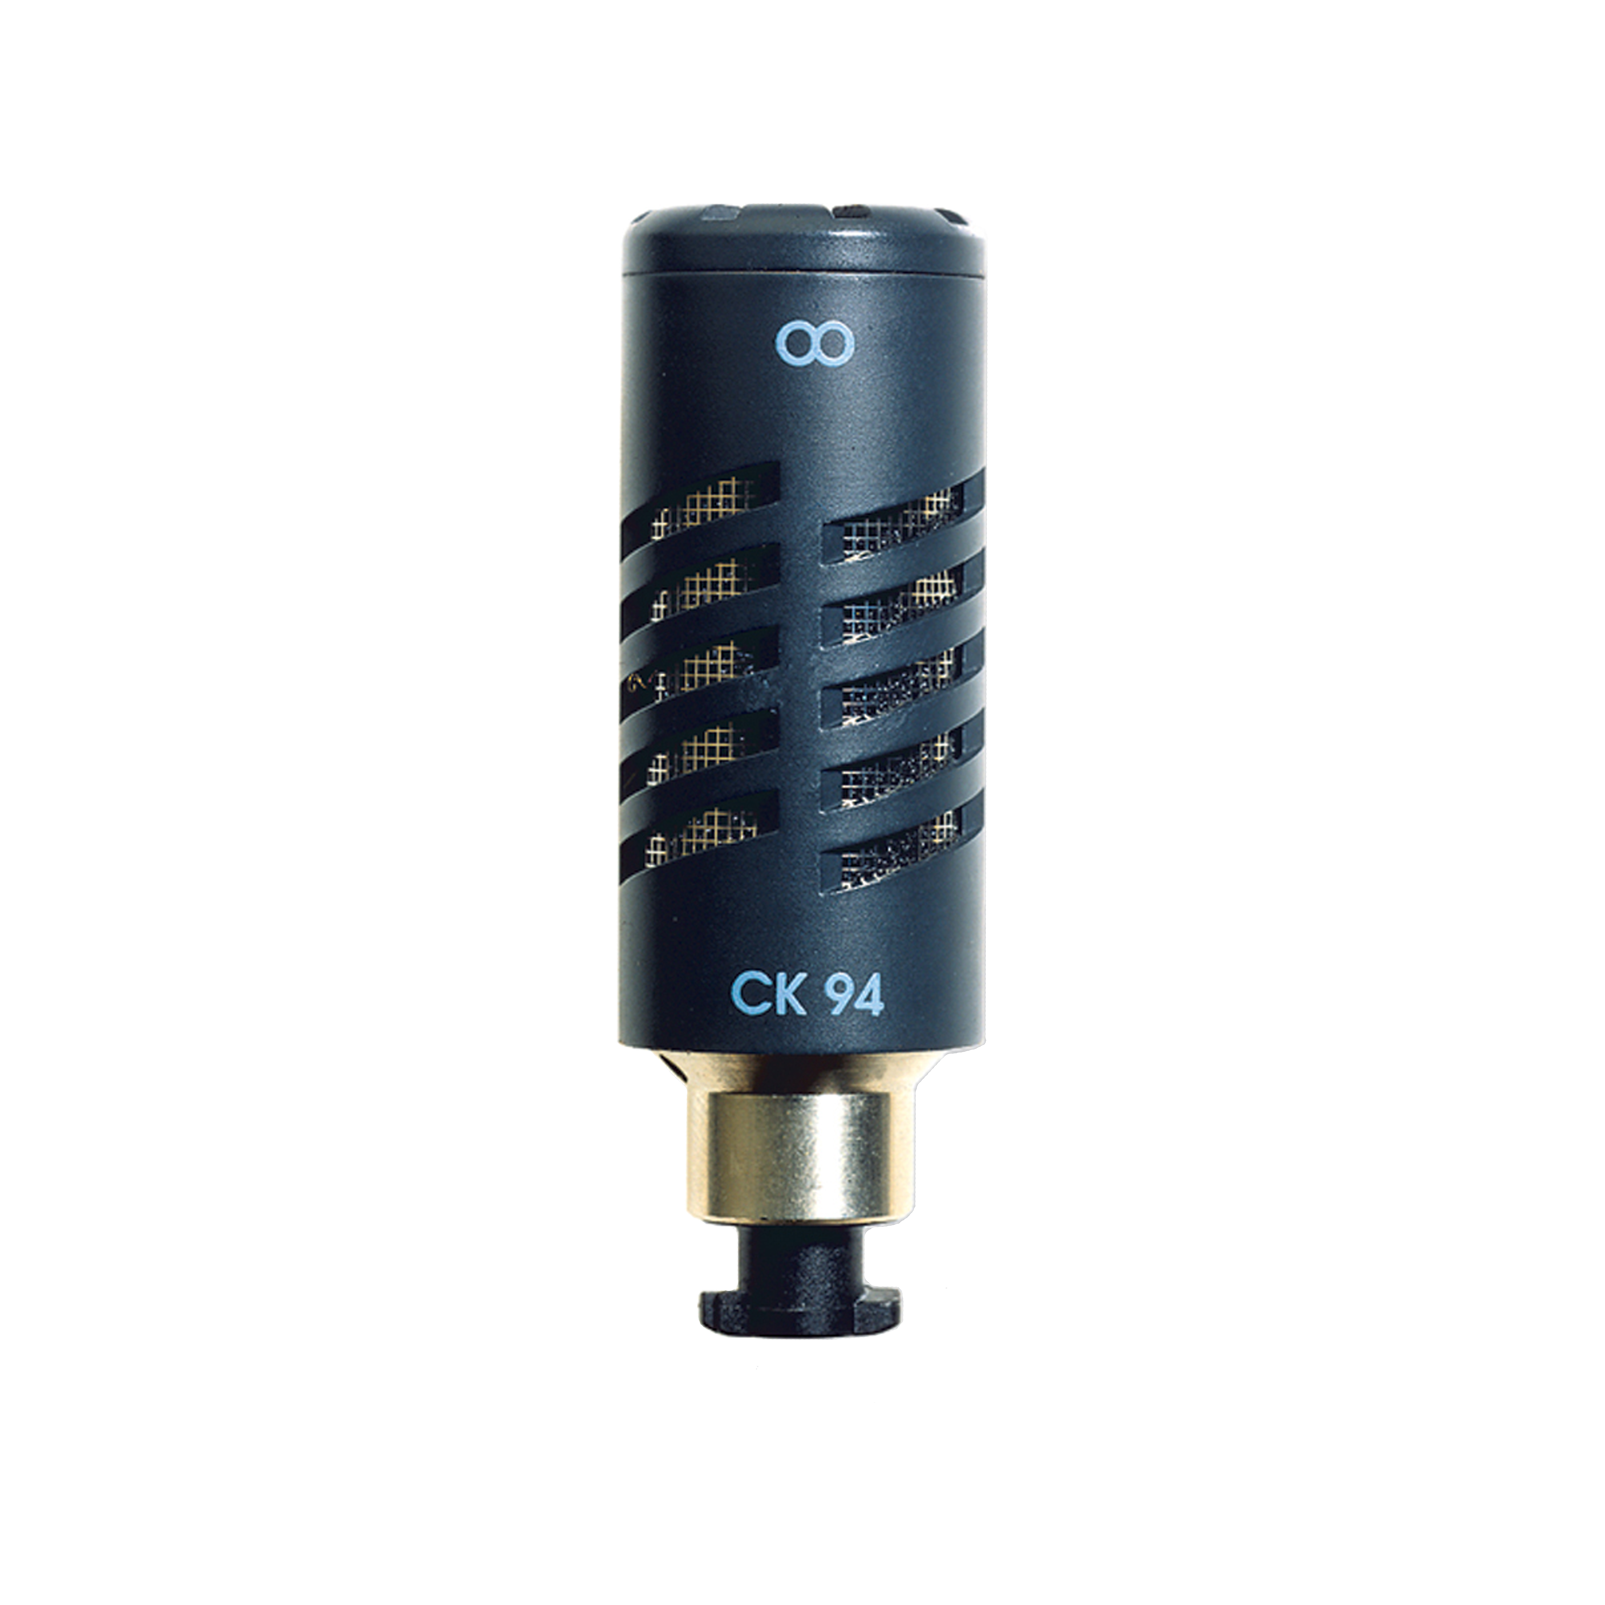 CK94 (discontinued) - Grey - High performance figure-eight condenser microphone capsule - Hero